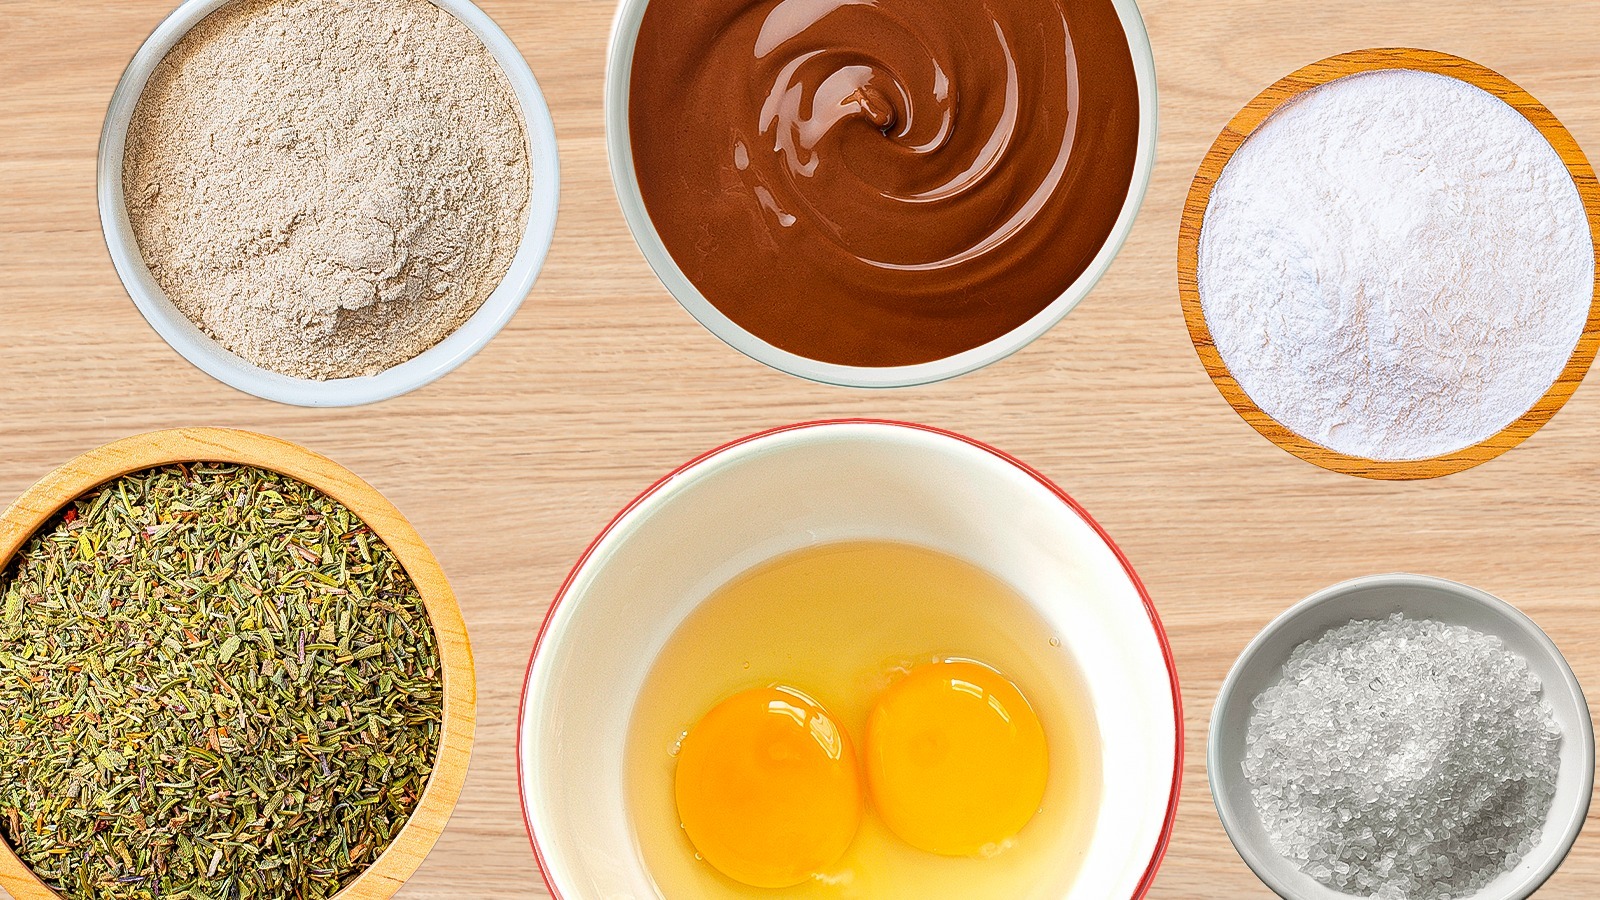 25 Essential Baking Ingredients - Bake with Sweetspot